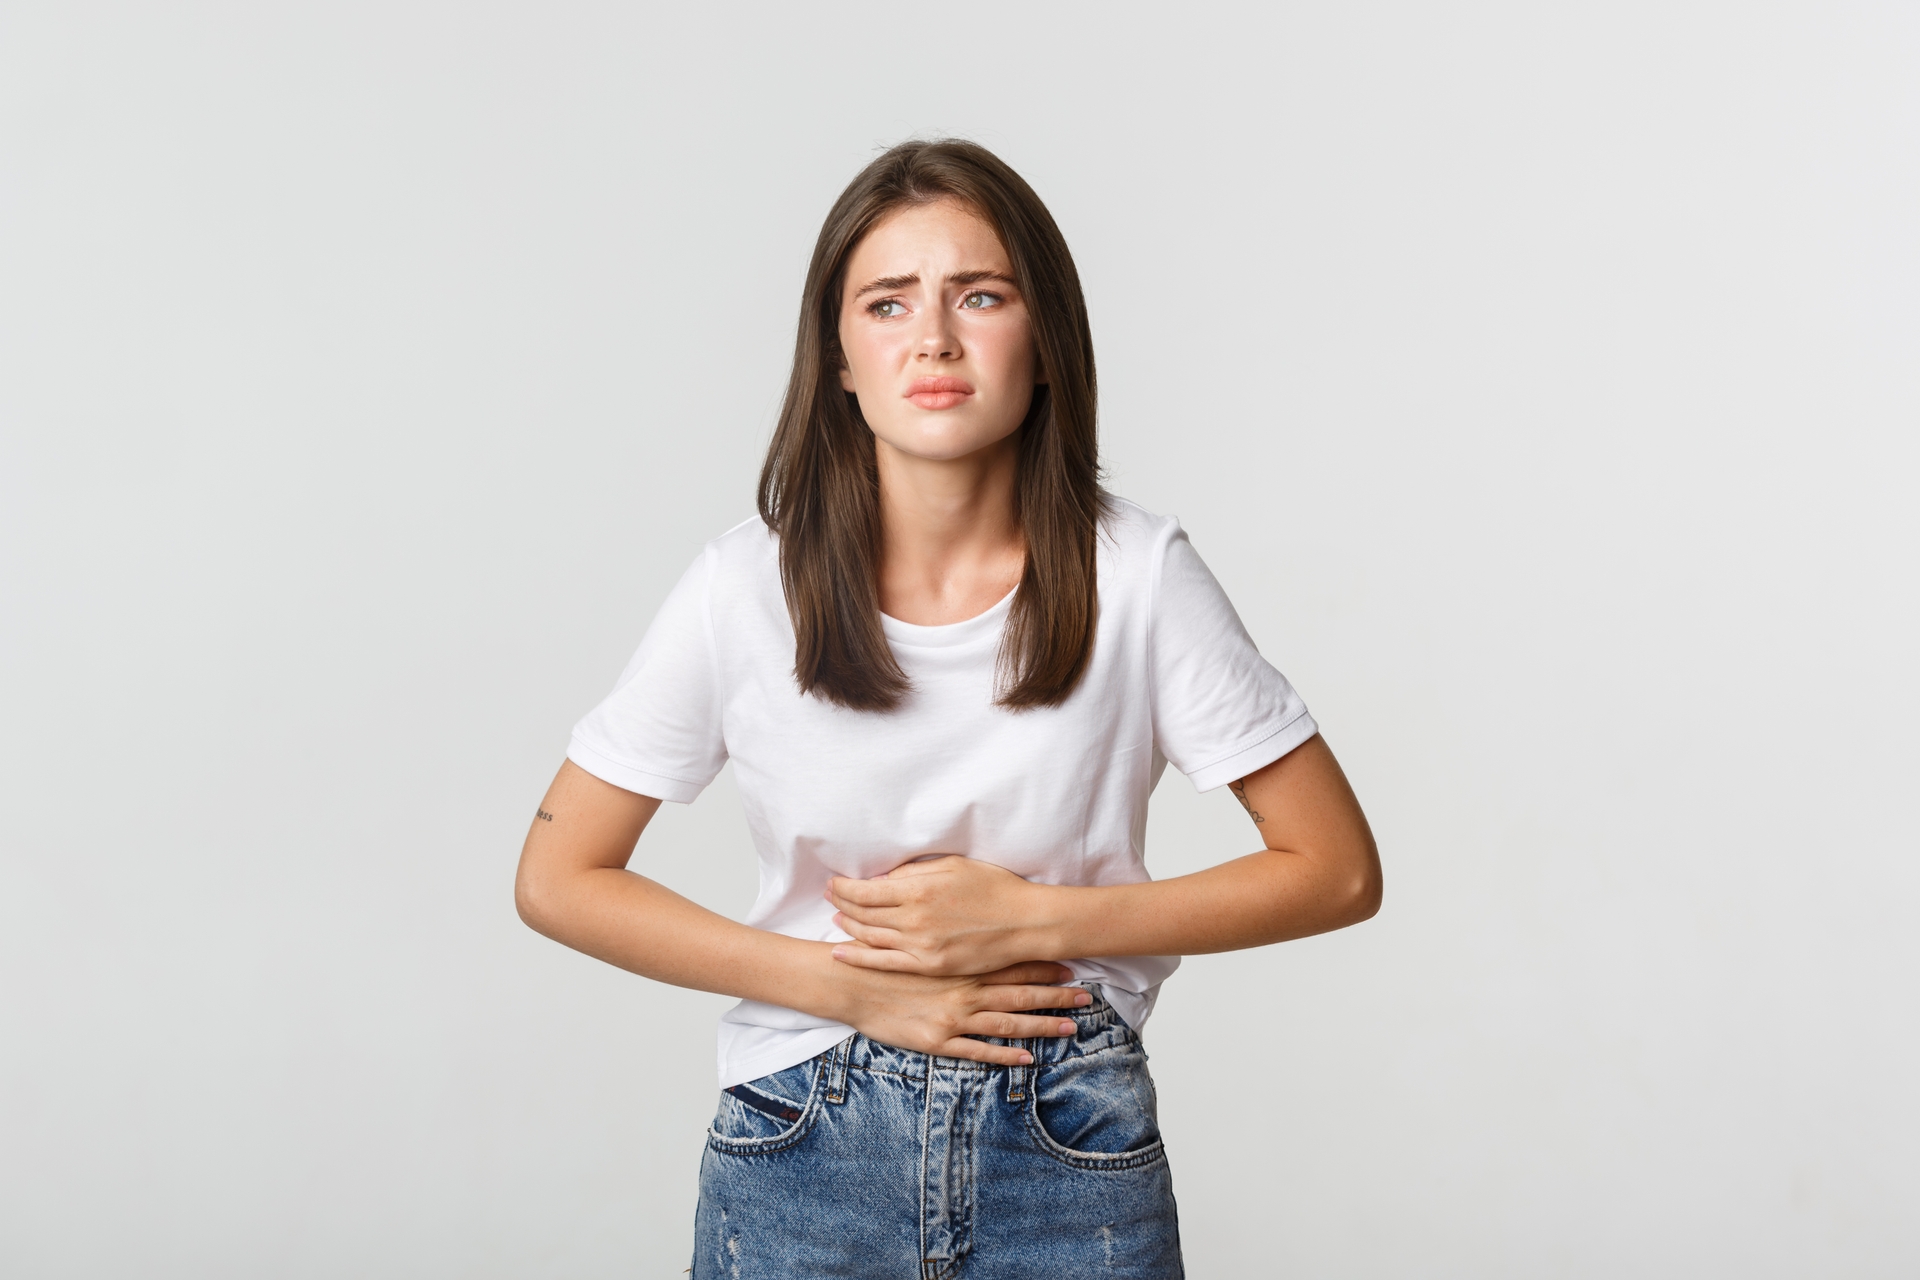 Acid Reflux Diet: Foods To Eat And Avoid